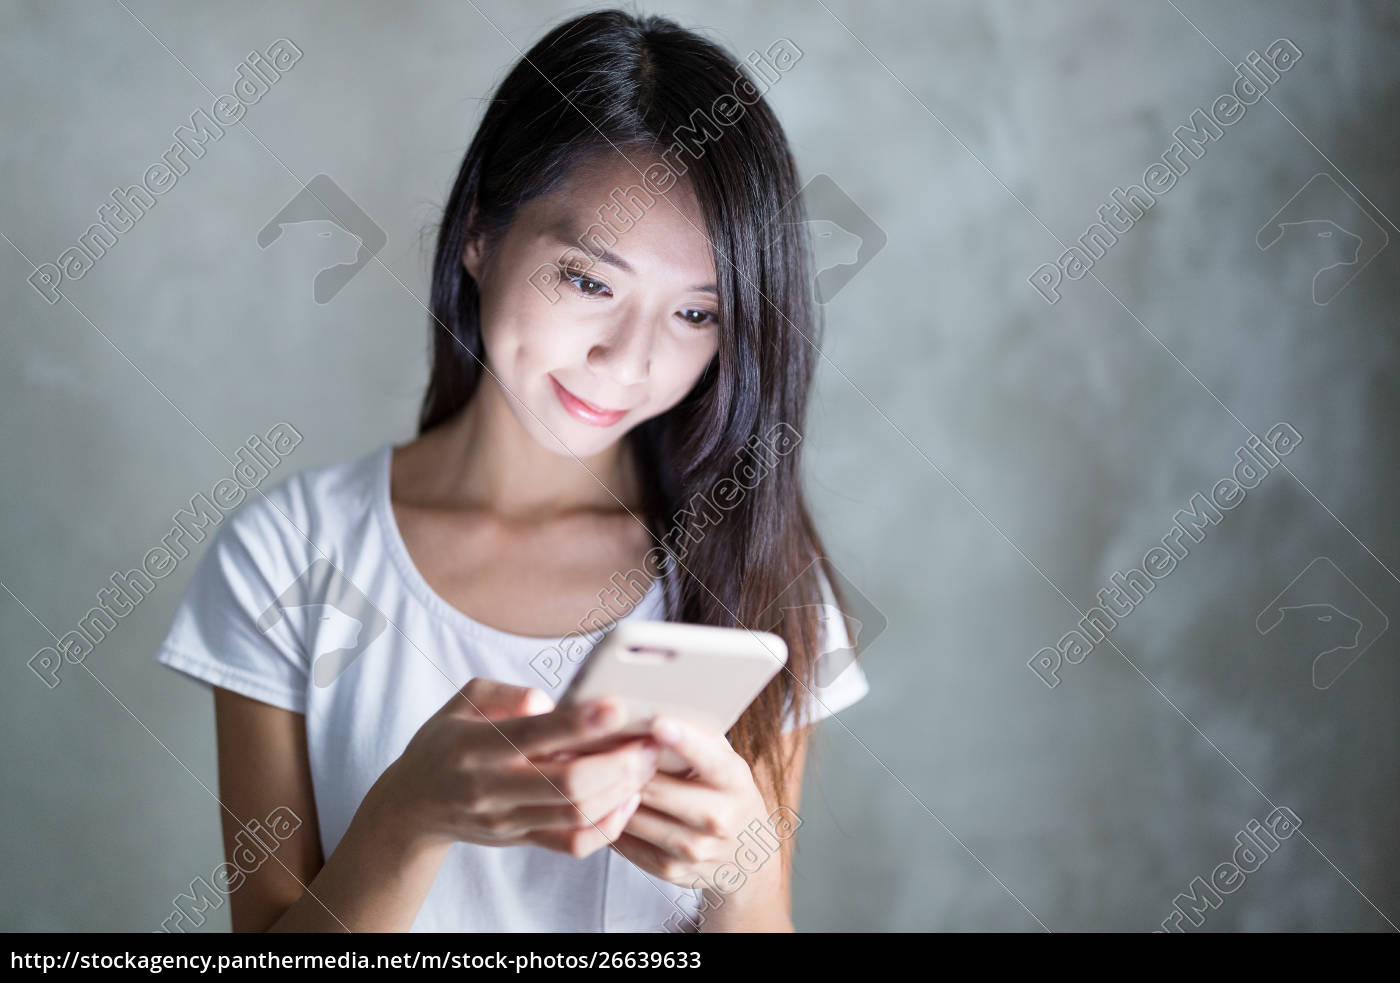 Lizenzfreies Bild 26639633 Young Woman Use Of Mobile Phone Over Grey Background